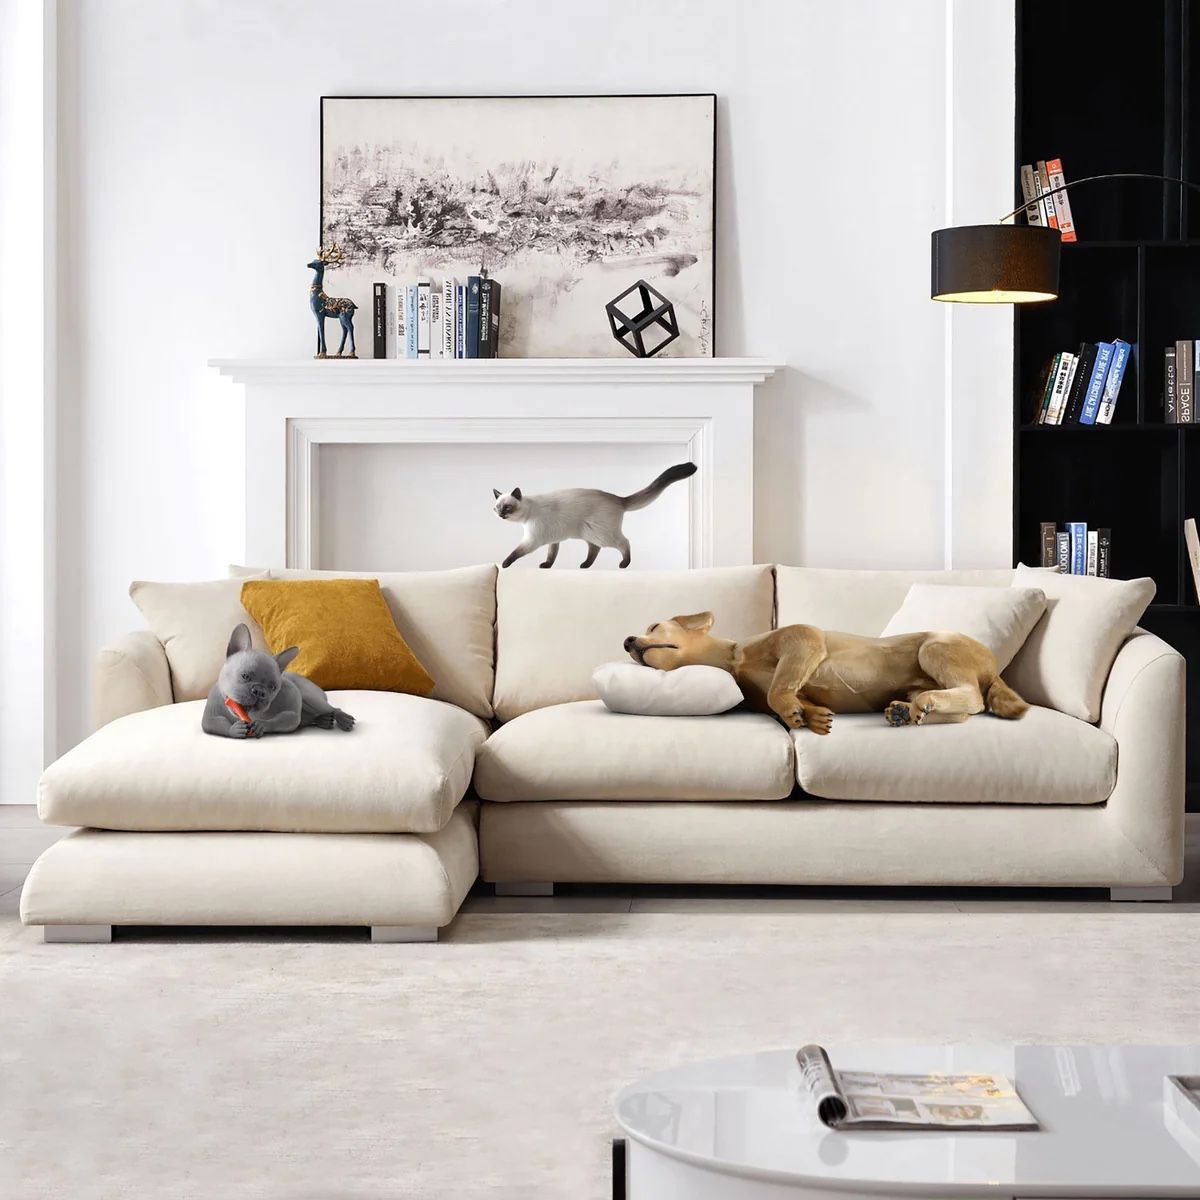 Feathers Sectional